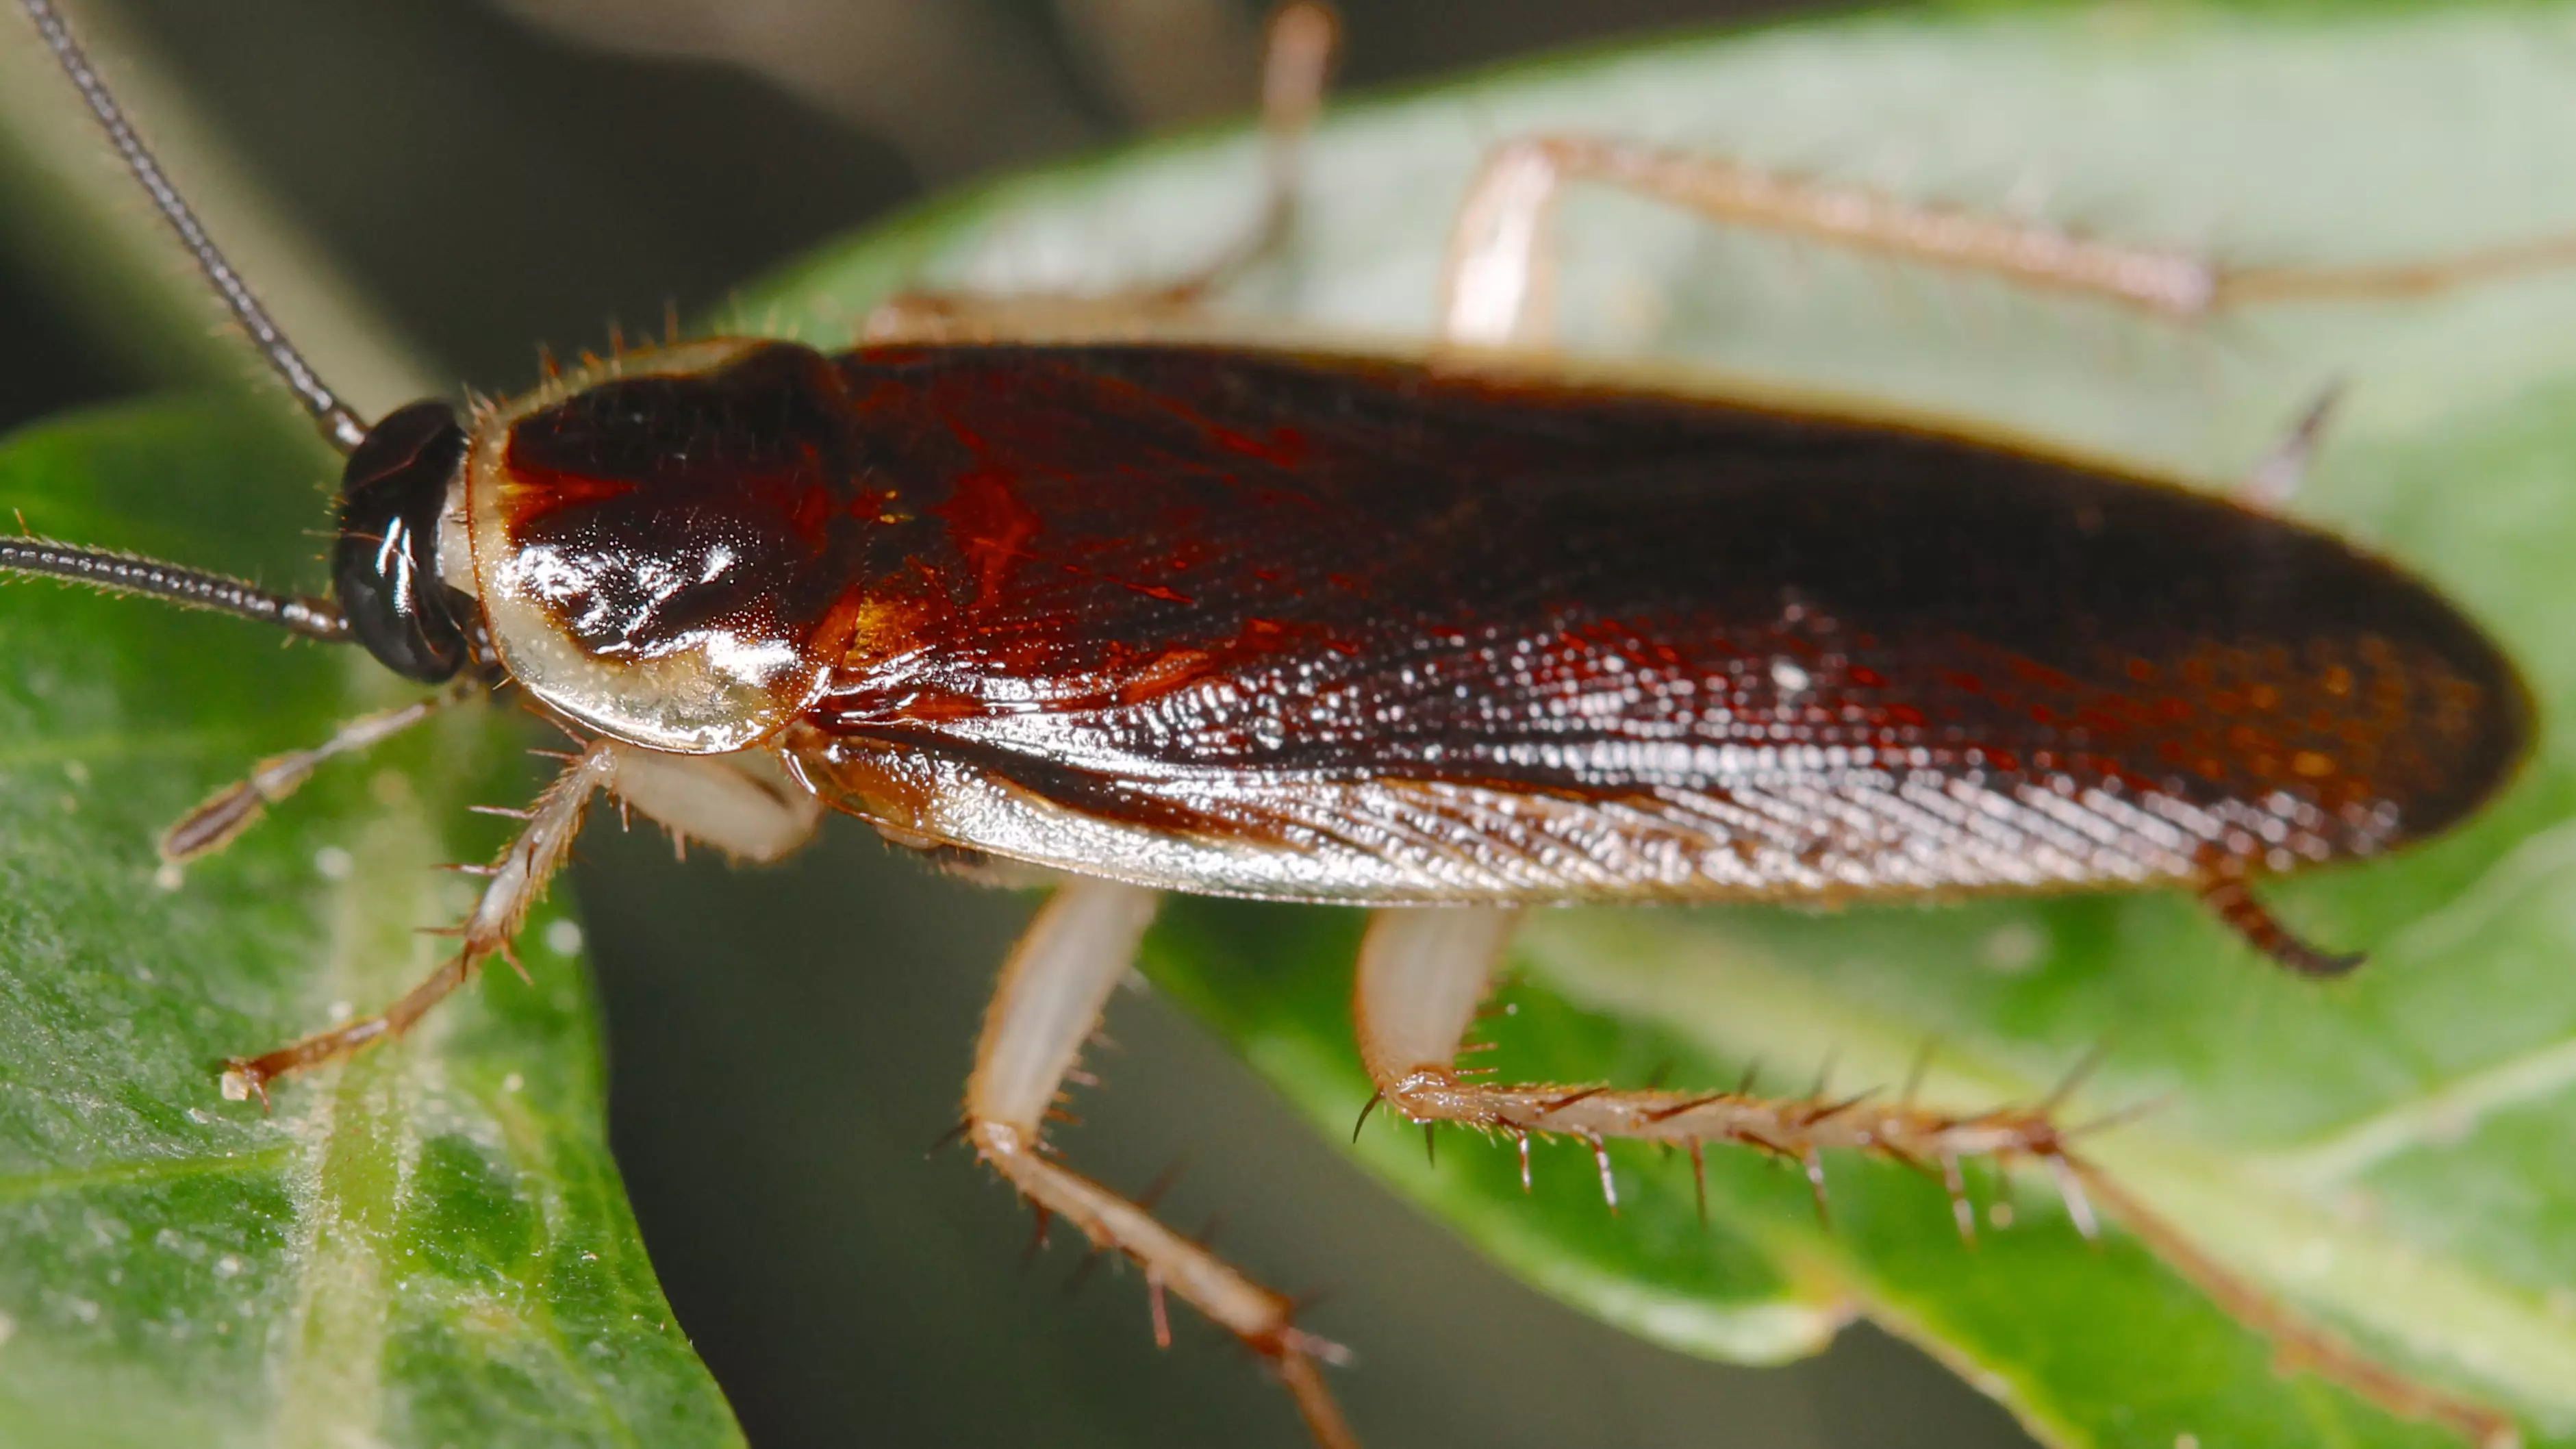 You Can Name A Cockroach After Your Ex This Valentine's Day